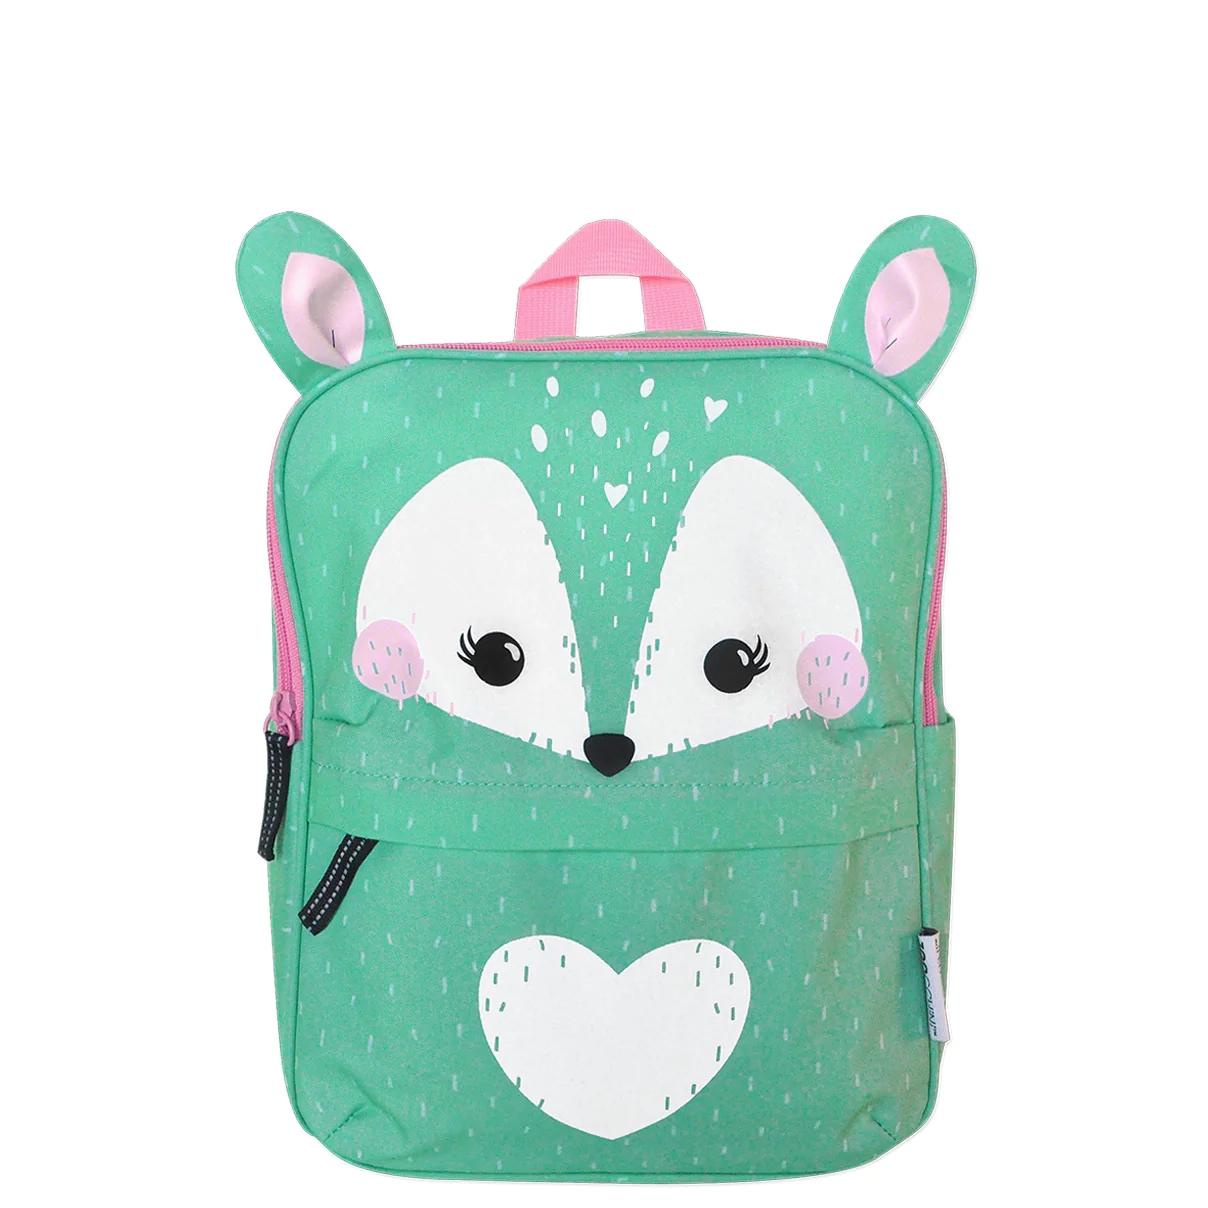 Everyday Backpack - Fiona the Fawn